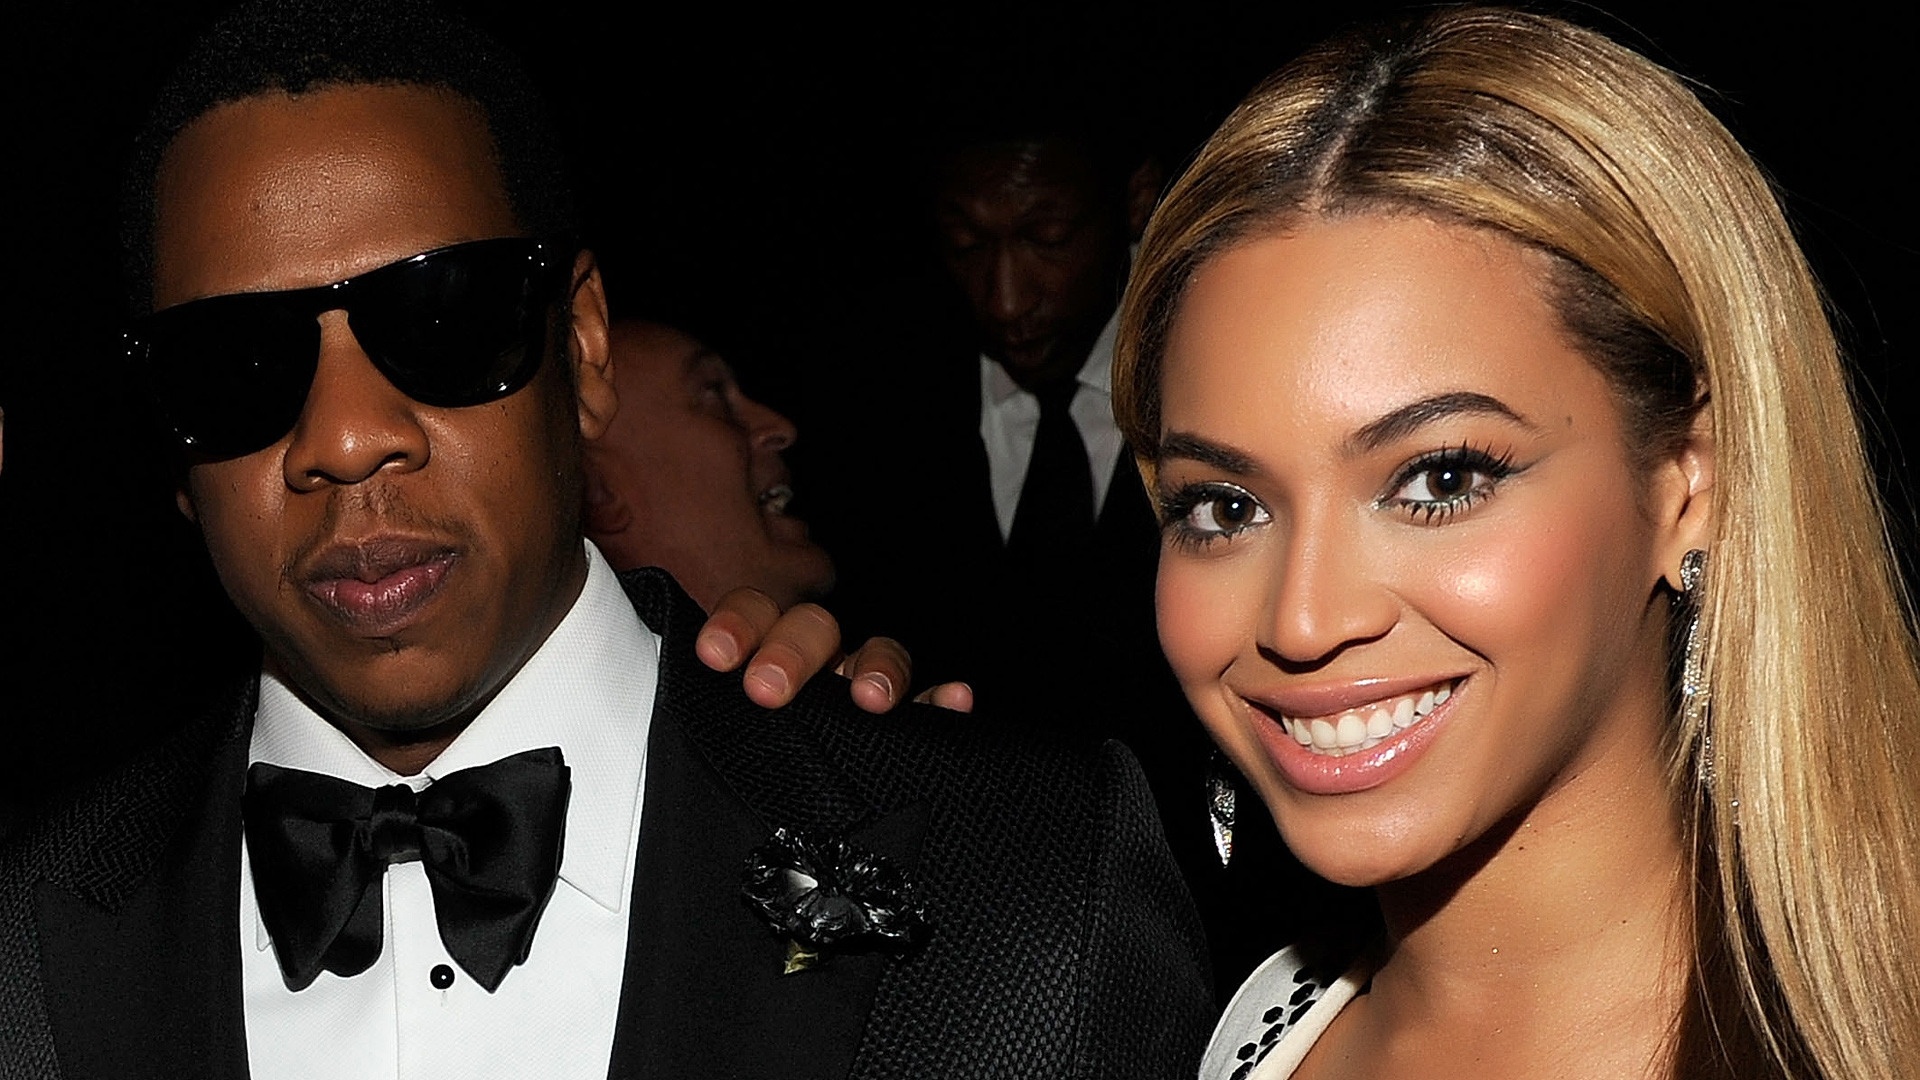 Jay-Z and Beyonce, Top wallpapers, Celebrity duo, Backgrounds, 1920x1080 Full HD Desktop